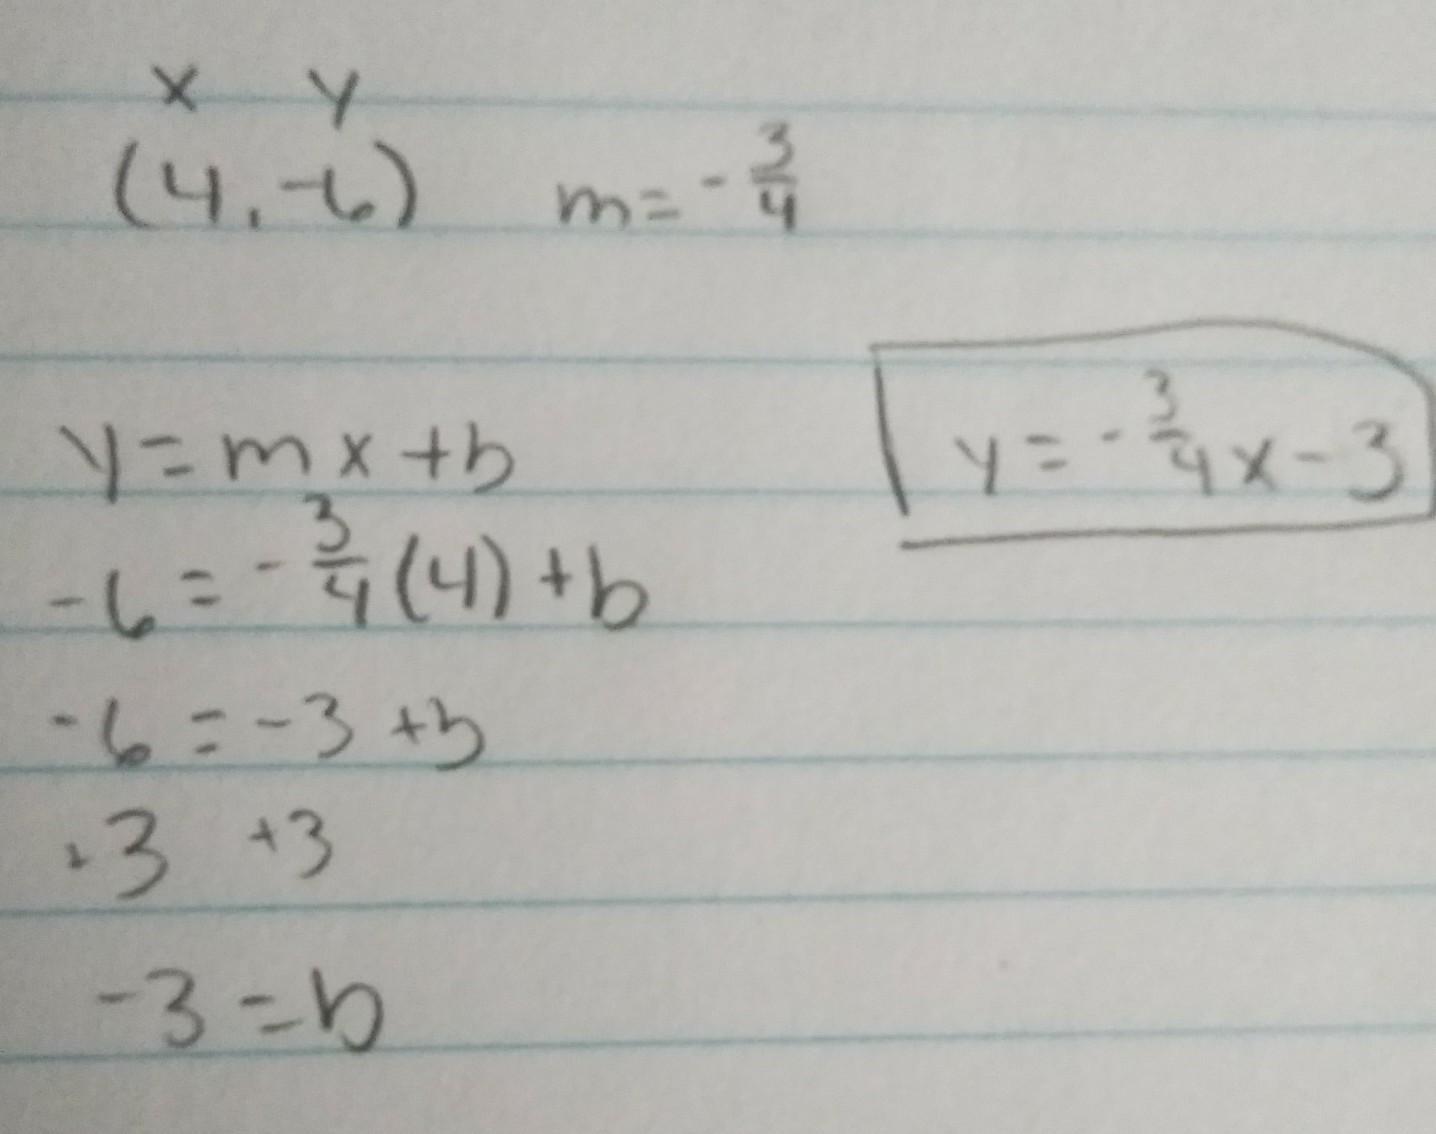 A Line Passes Through The HELP ME PLEASE Point (4, -6) And Has A Slope Of -3/4. Which Is The Equation